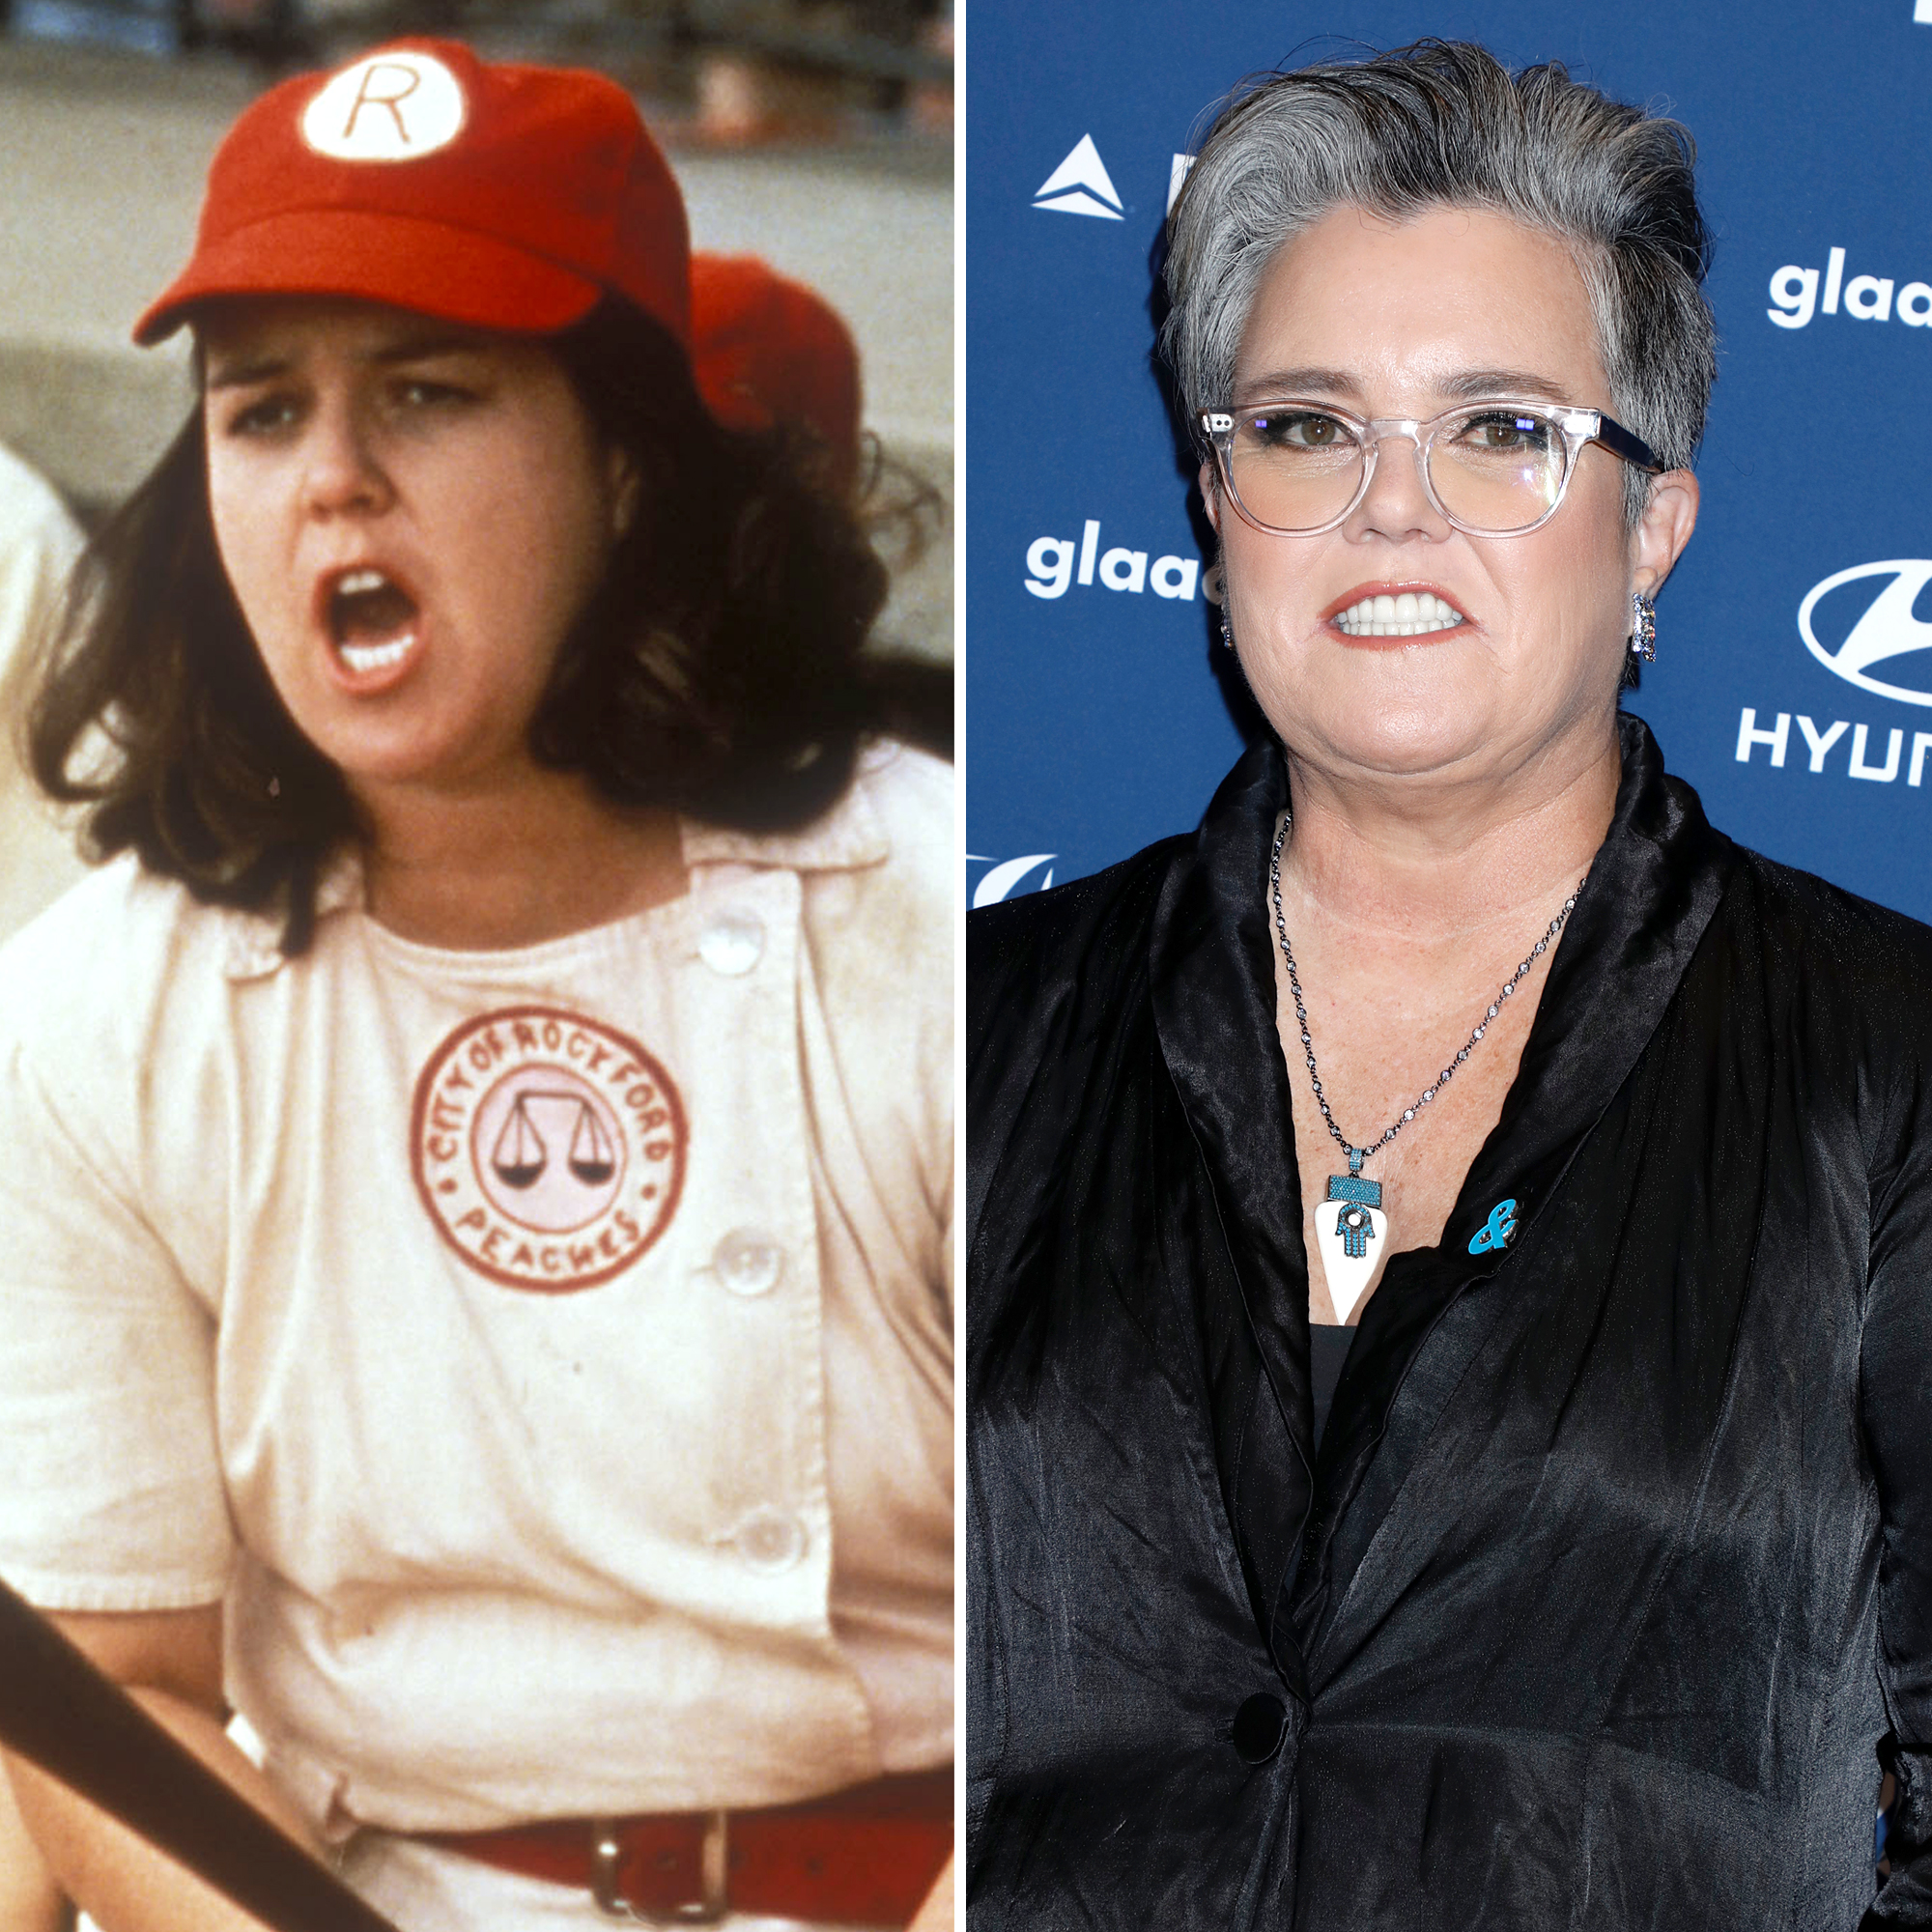 What The Cast Of Major League Looks Like Today